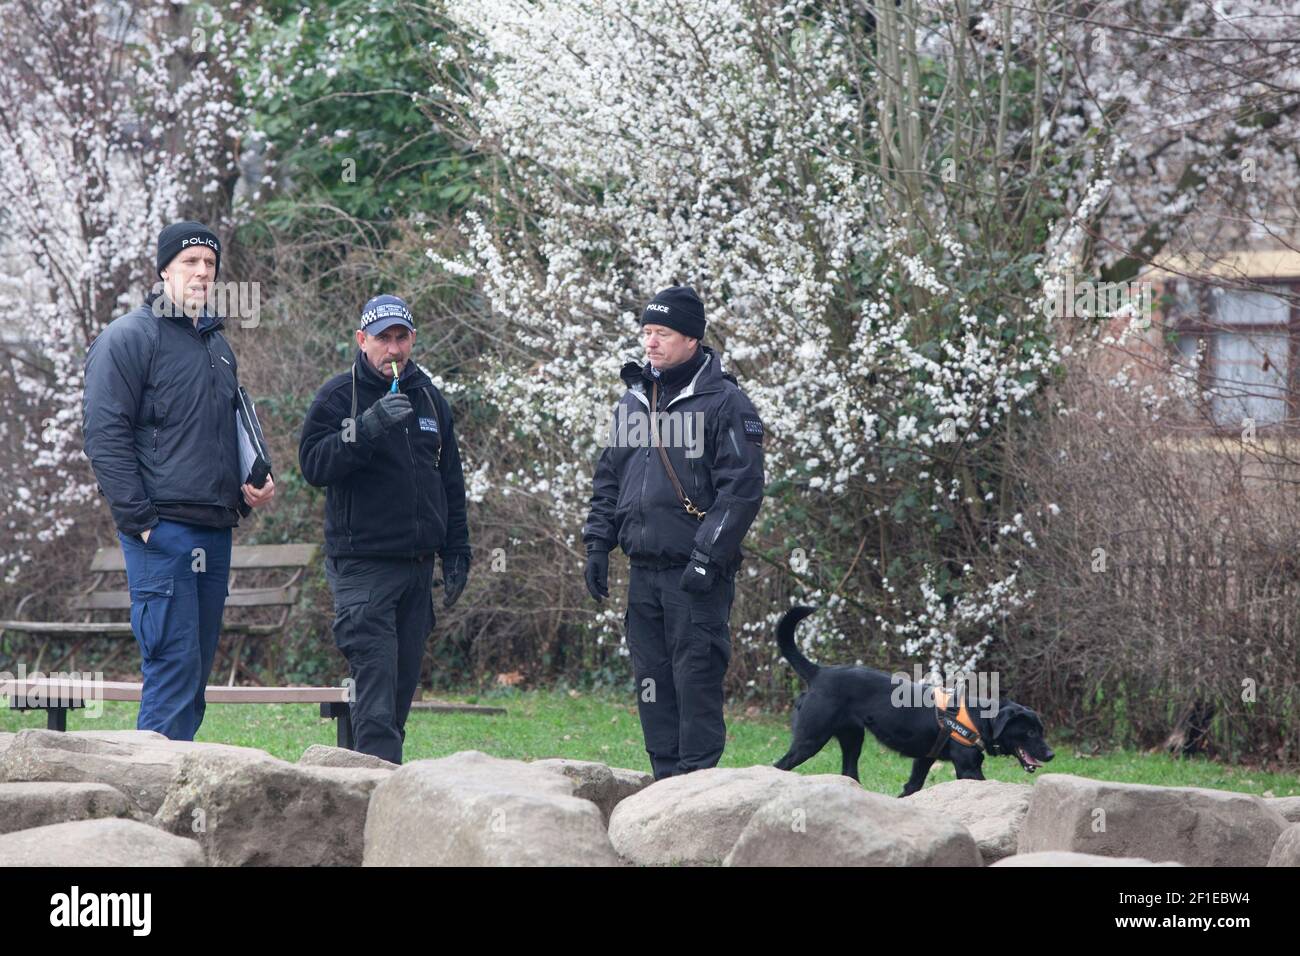 London, UK, 8 March 2021: Police sniffer dogs search for evidence relating to the disappearance of Sarah Everard, last seen on Poynders Road, Clapham, part of the A205  South Circular. Agnes Riley Gardens is on Poynders Road and was also searched by police sniffer dogs. Anna Watson/Alamy Live News Stock Photo